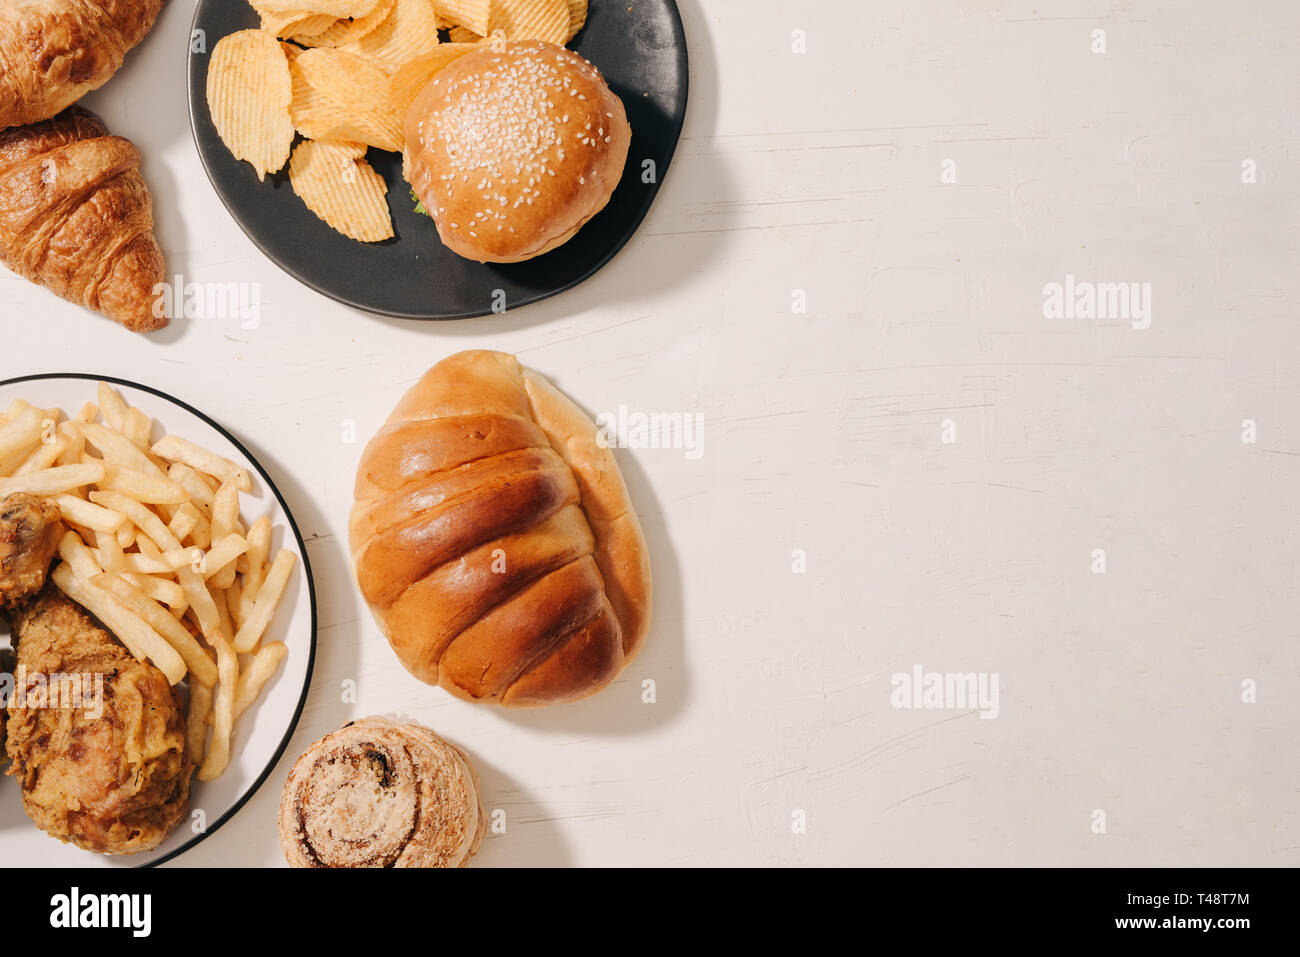 fast food and unhealthy eating concept - close up of fast food snacks and cola drink on white table Stock Photo